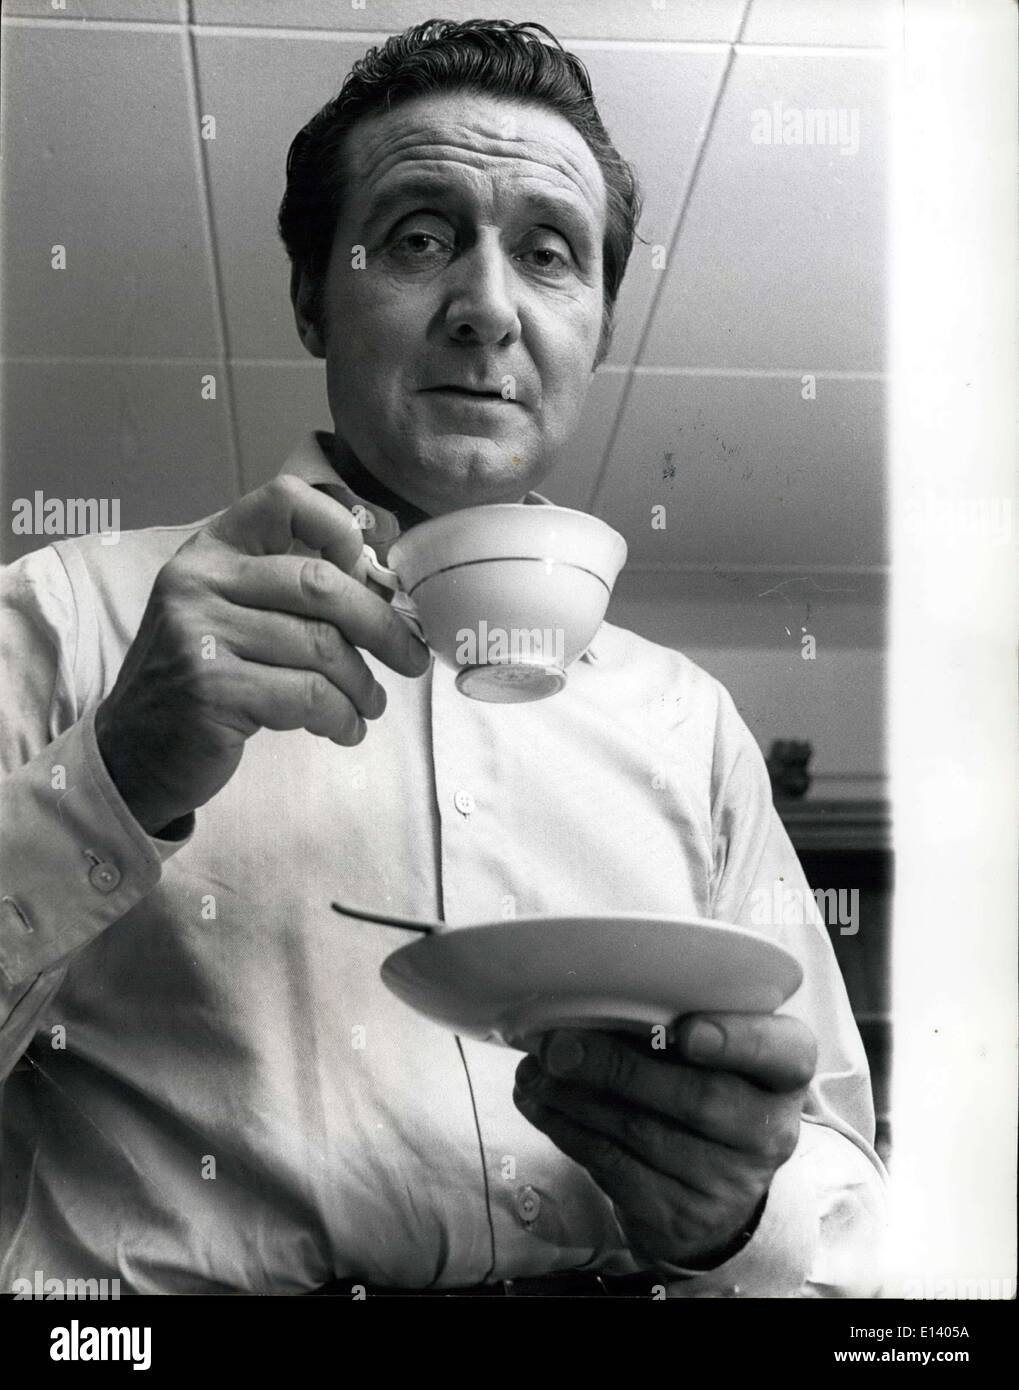 Mar. 31, 2012 - Patrick MacNee 'John Steed' in 'The Avengers' television series takes a short break between takes to enjoy a cup of tea. Stock Photo